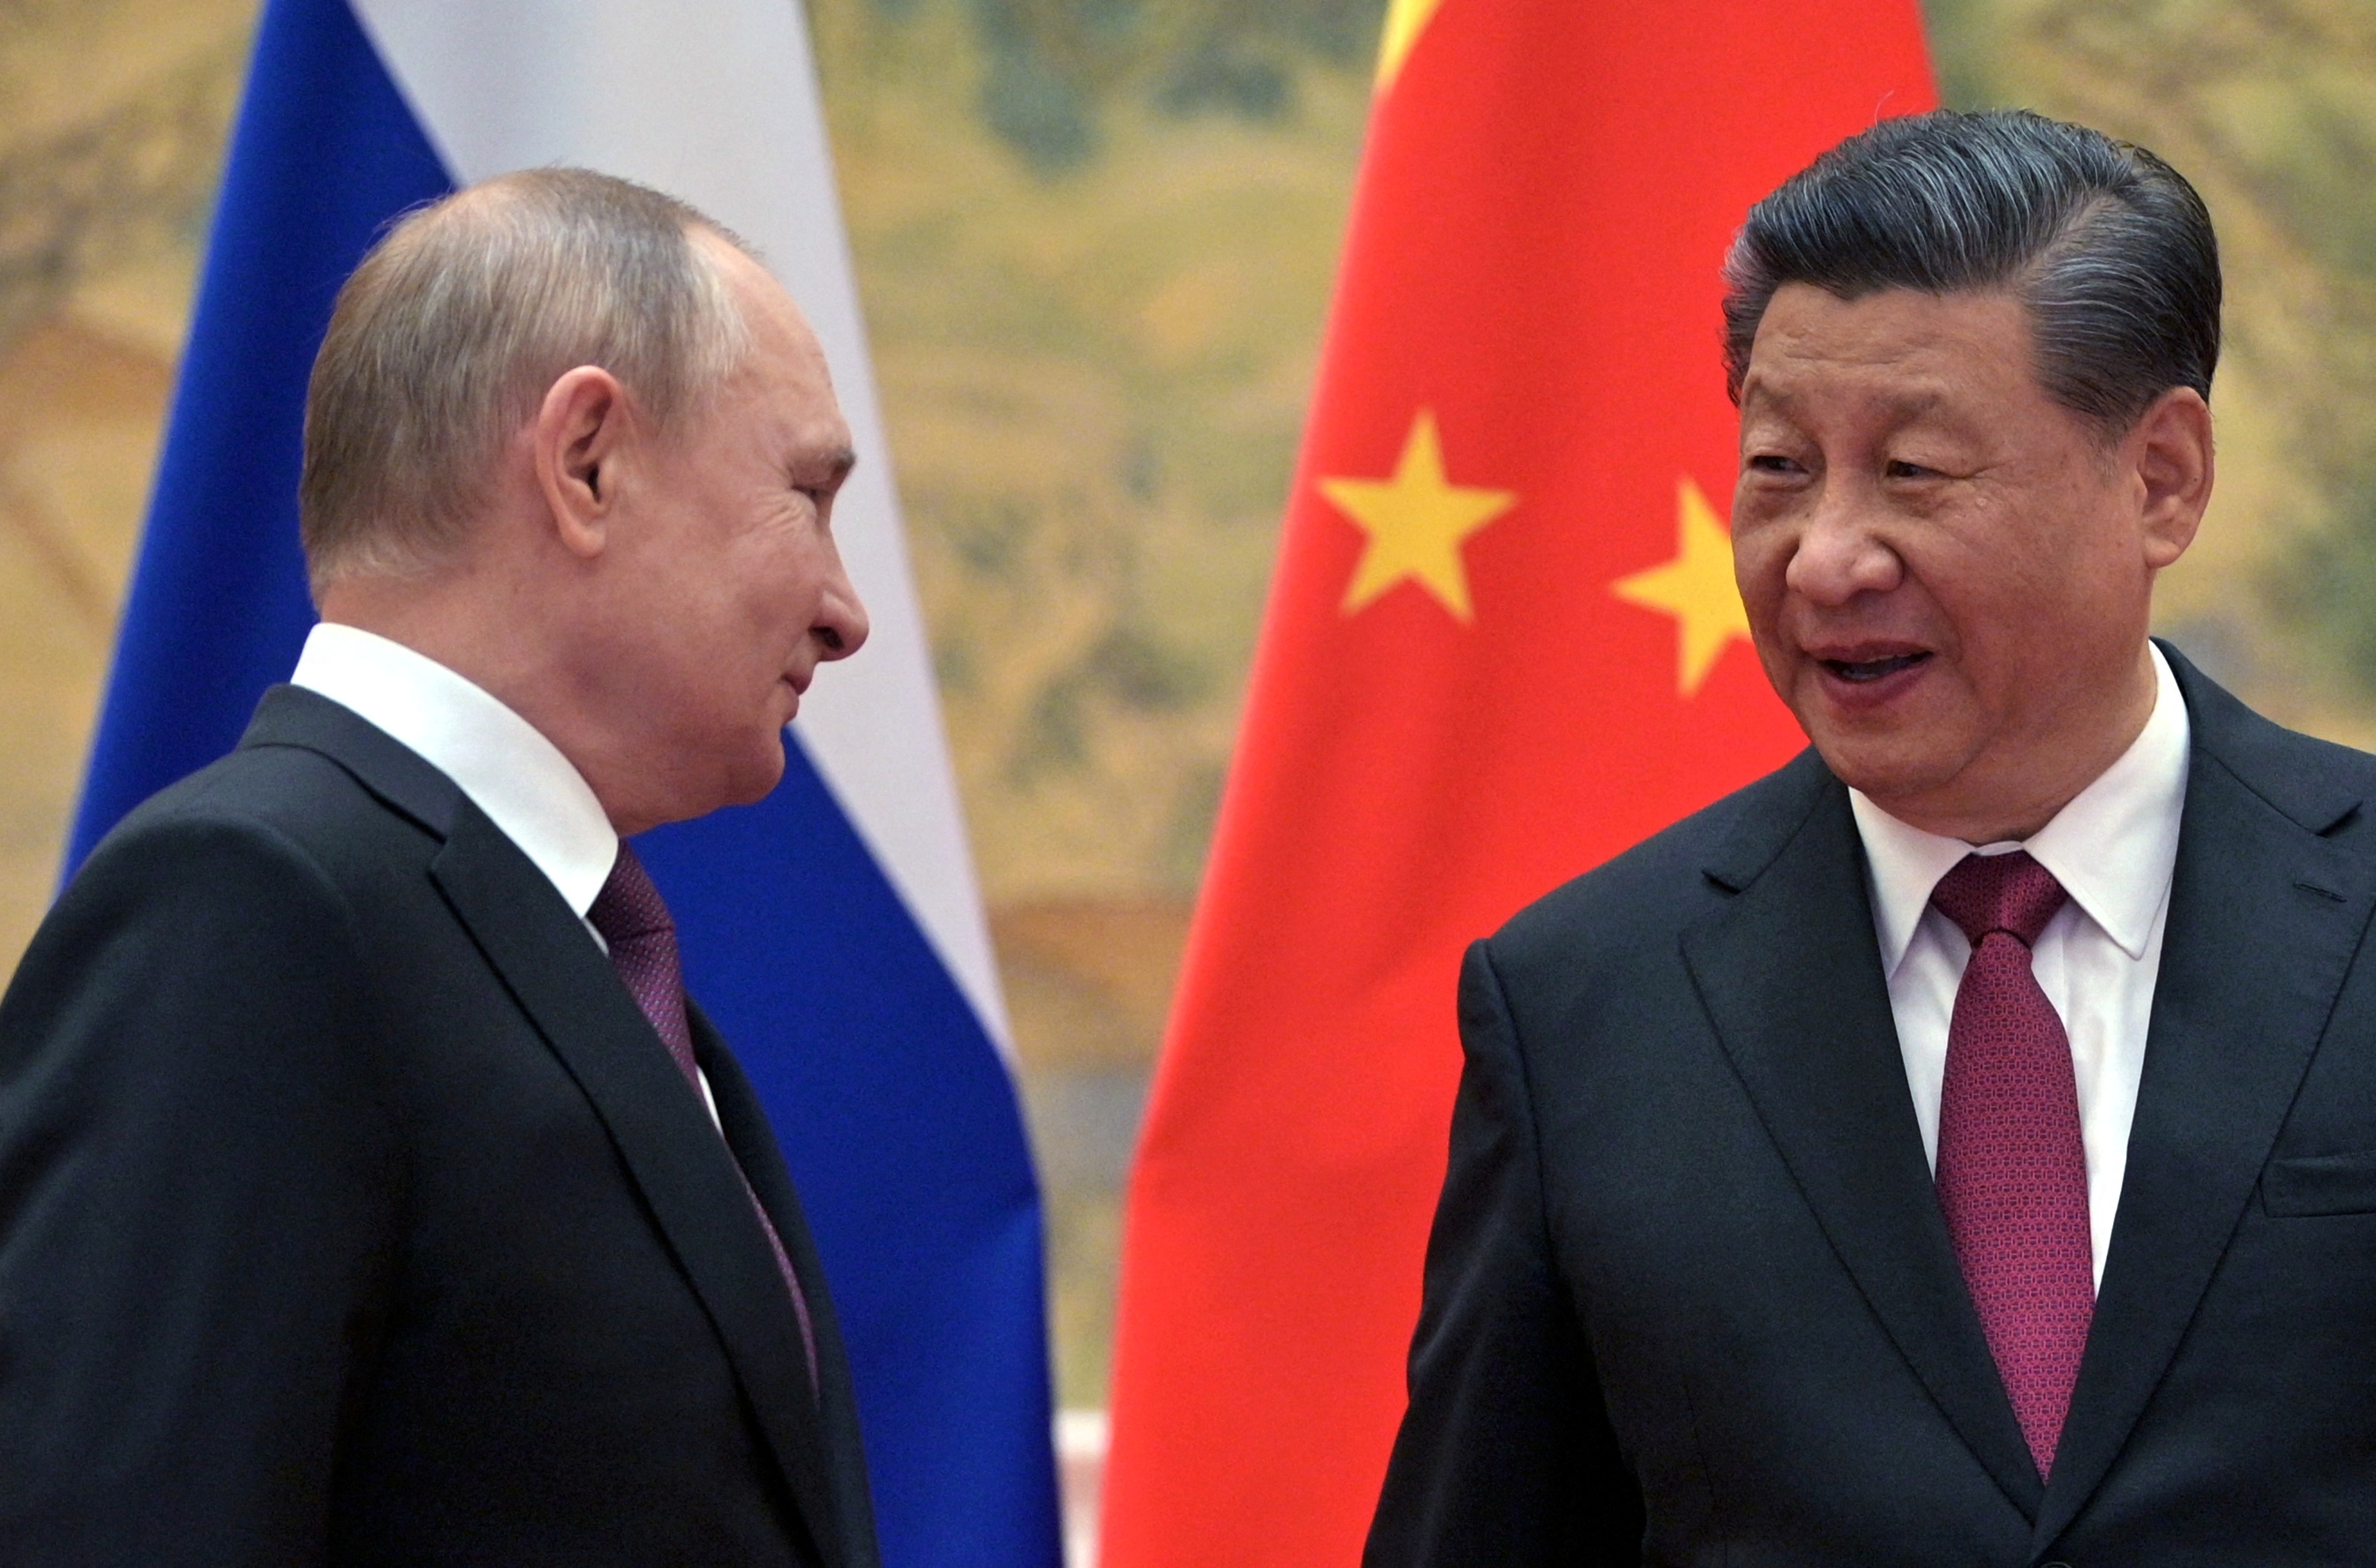 Russian President Vladimir Putin attends a meeting with Chinese President Xi Jinping in Beijing, China February 4, 2022. Sputnik/Aleksey Druzhinin/Kremlin via REUTERS ATTENTION EDITORS - THIS IMAGE WAS PROVIDED BY A THIRD PARTY.